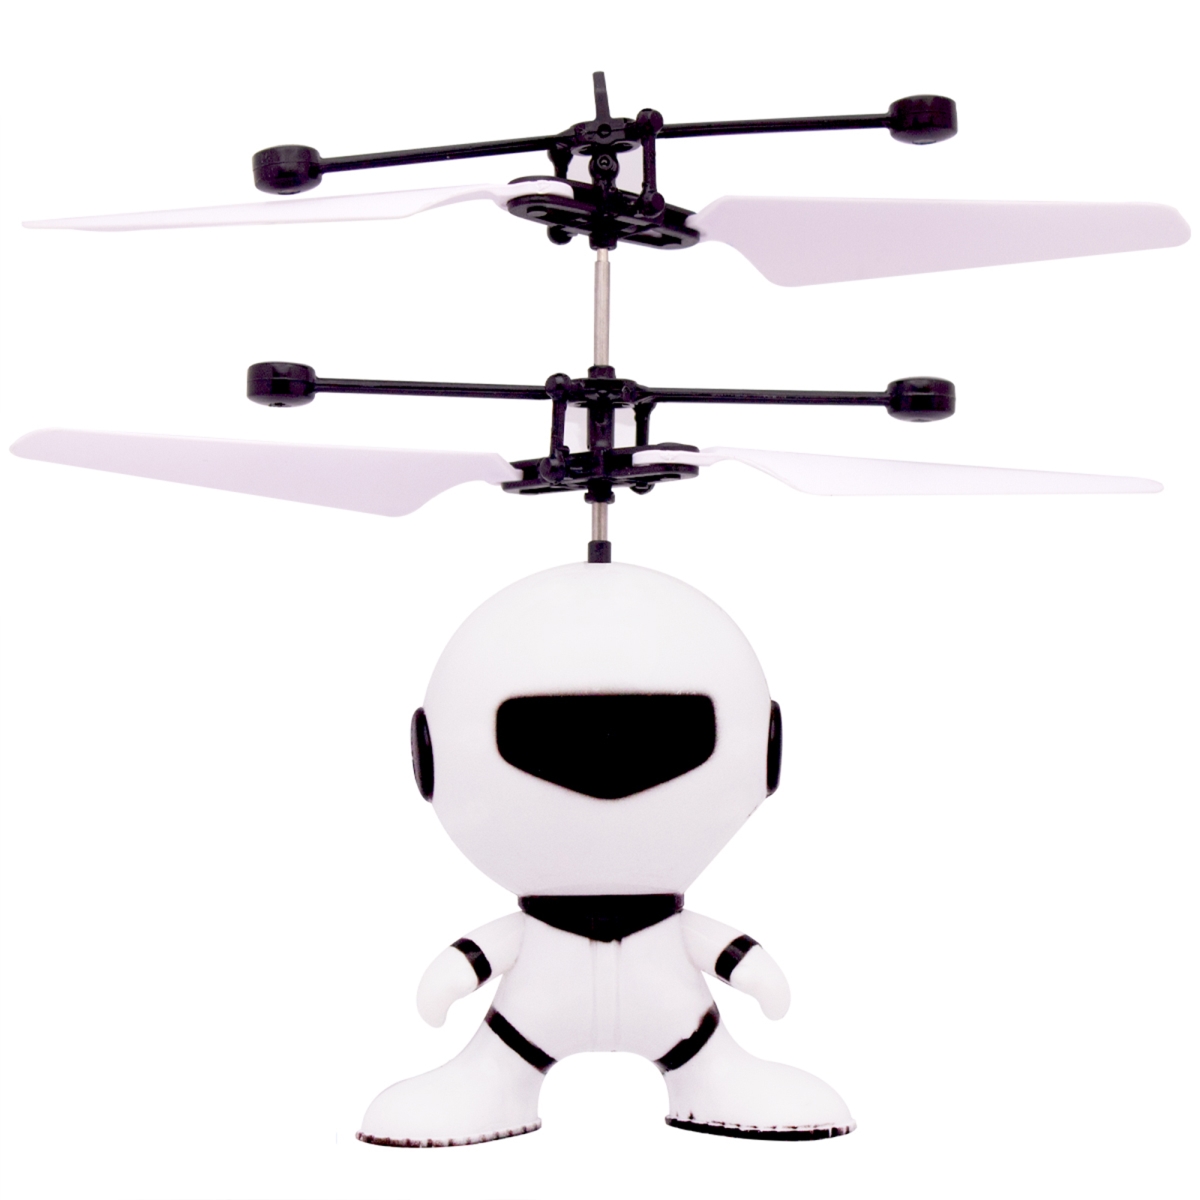 Picture of Zummy FS1160BL Hand Operated Flying Robot Helicopter Toy